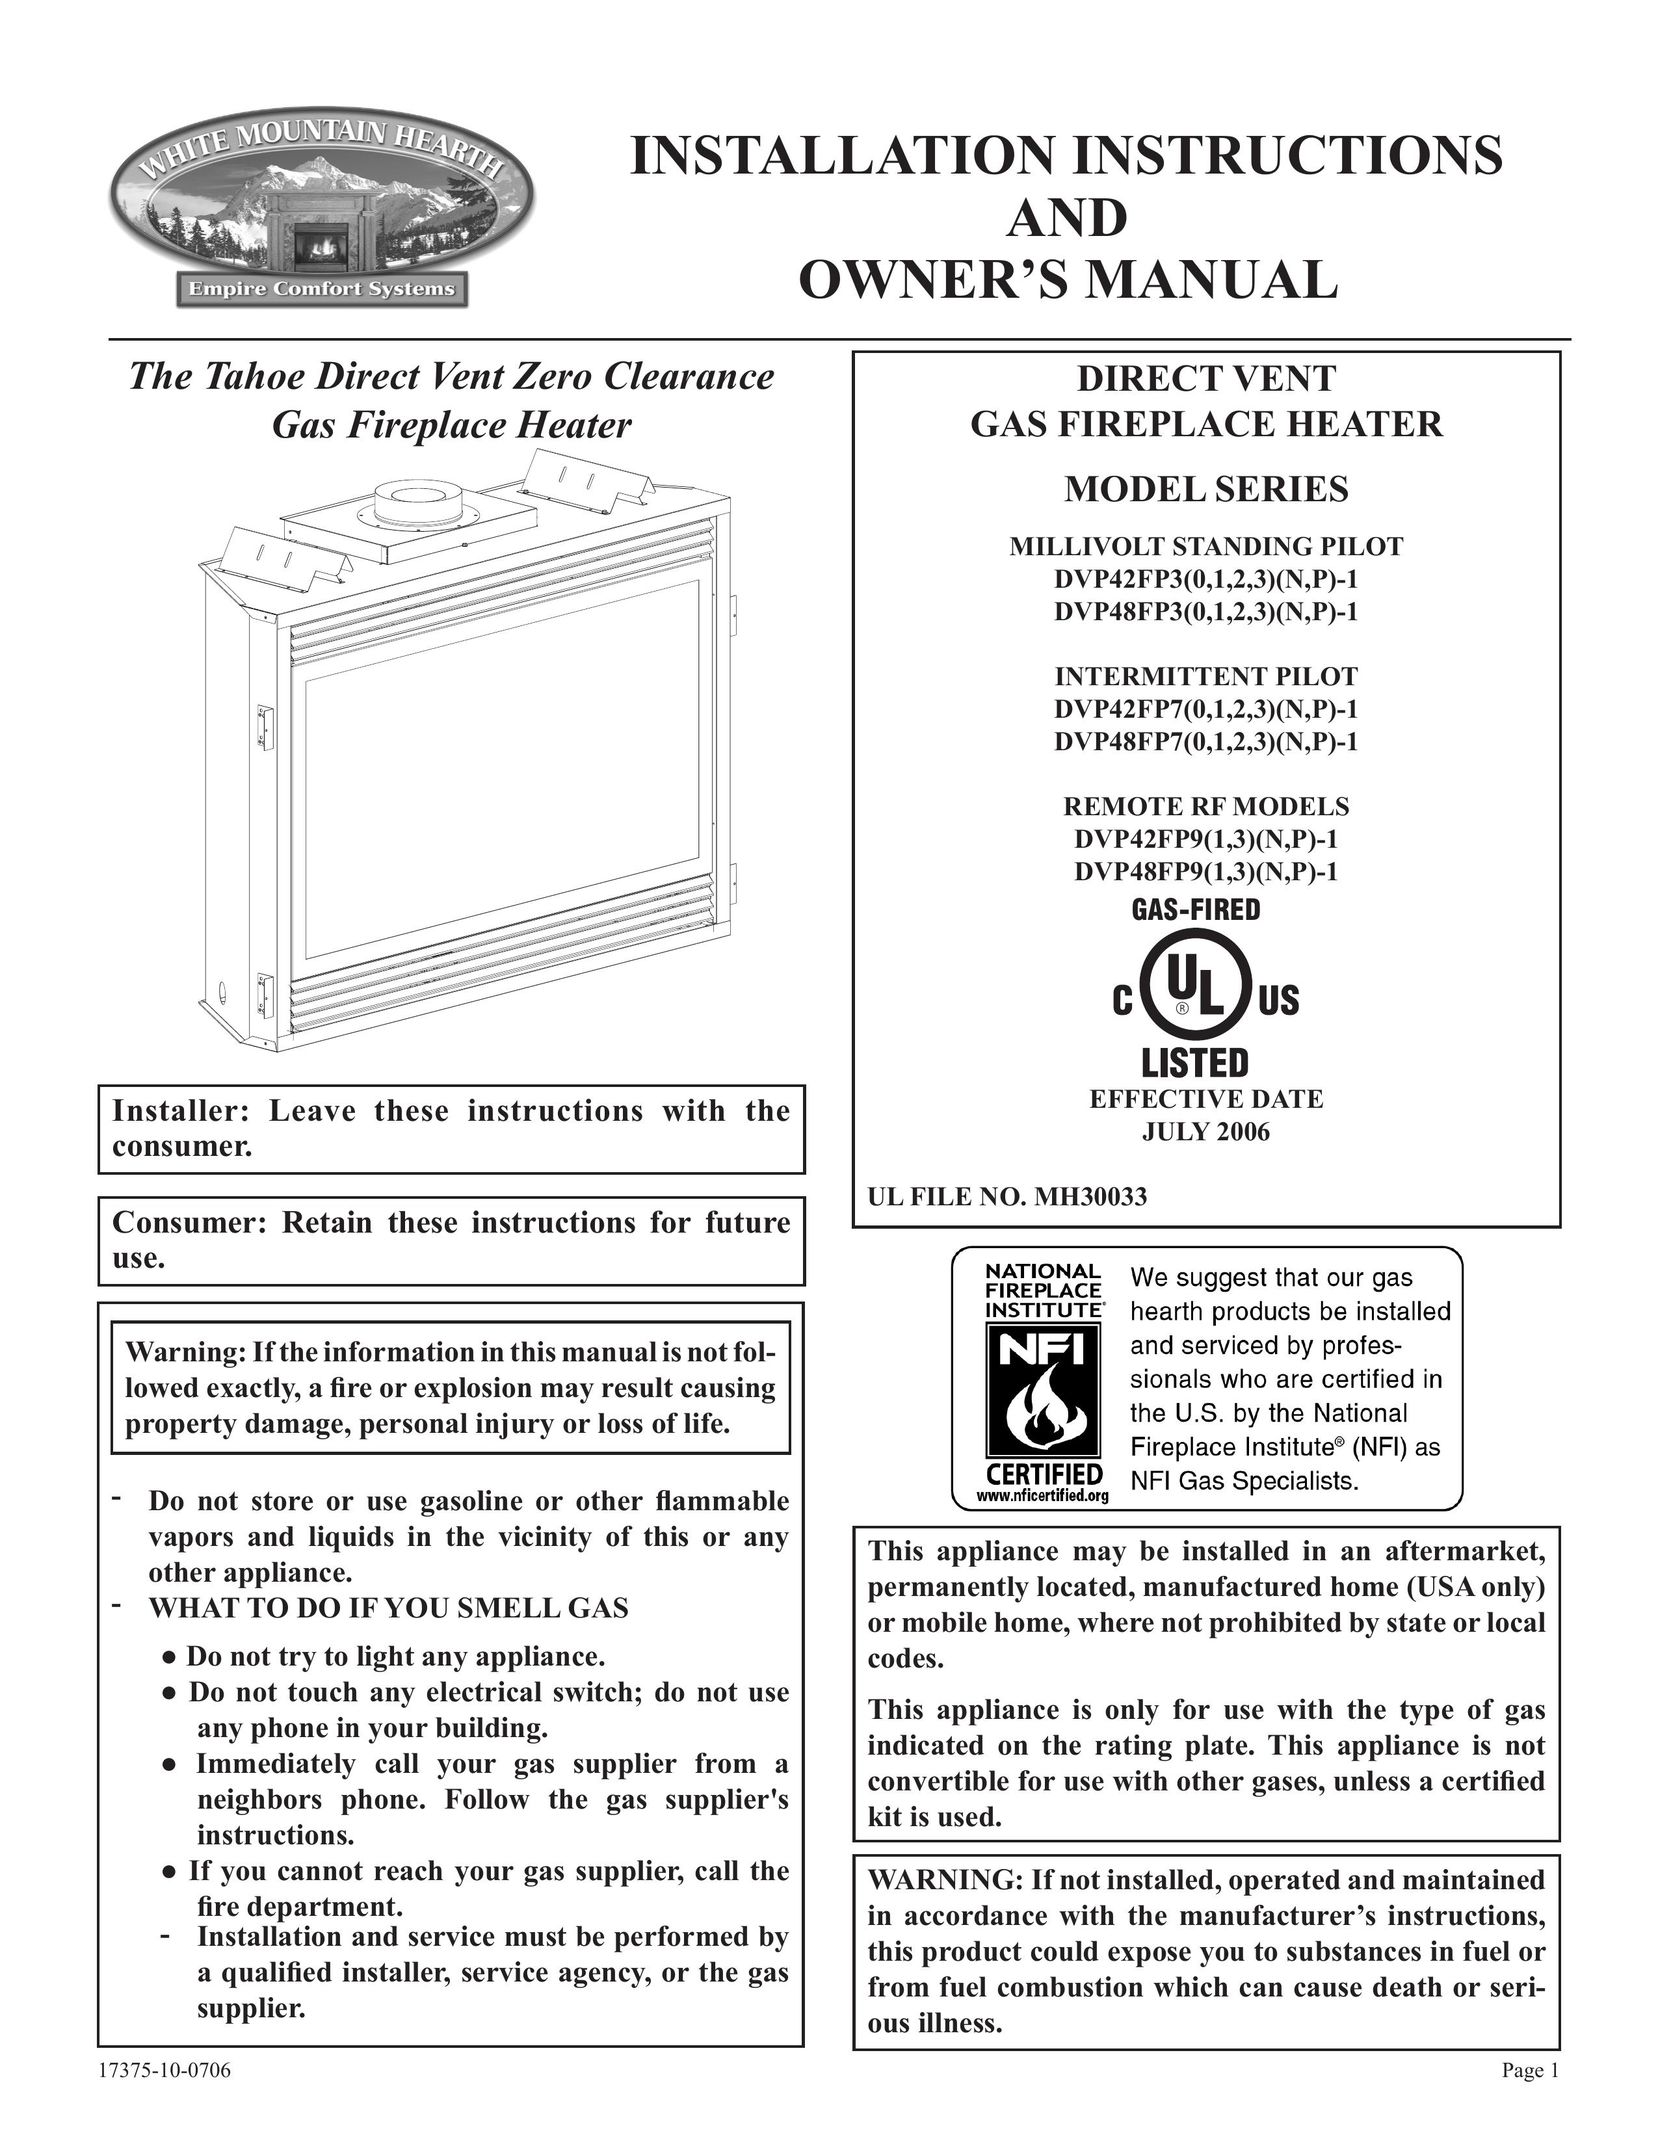 Empire Comfort Systems DVP42FP7(0,1,2,3)(N,P)-1 Indoor Fireplace User Manual